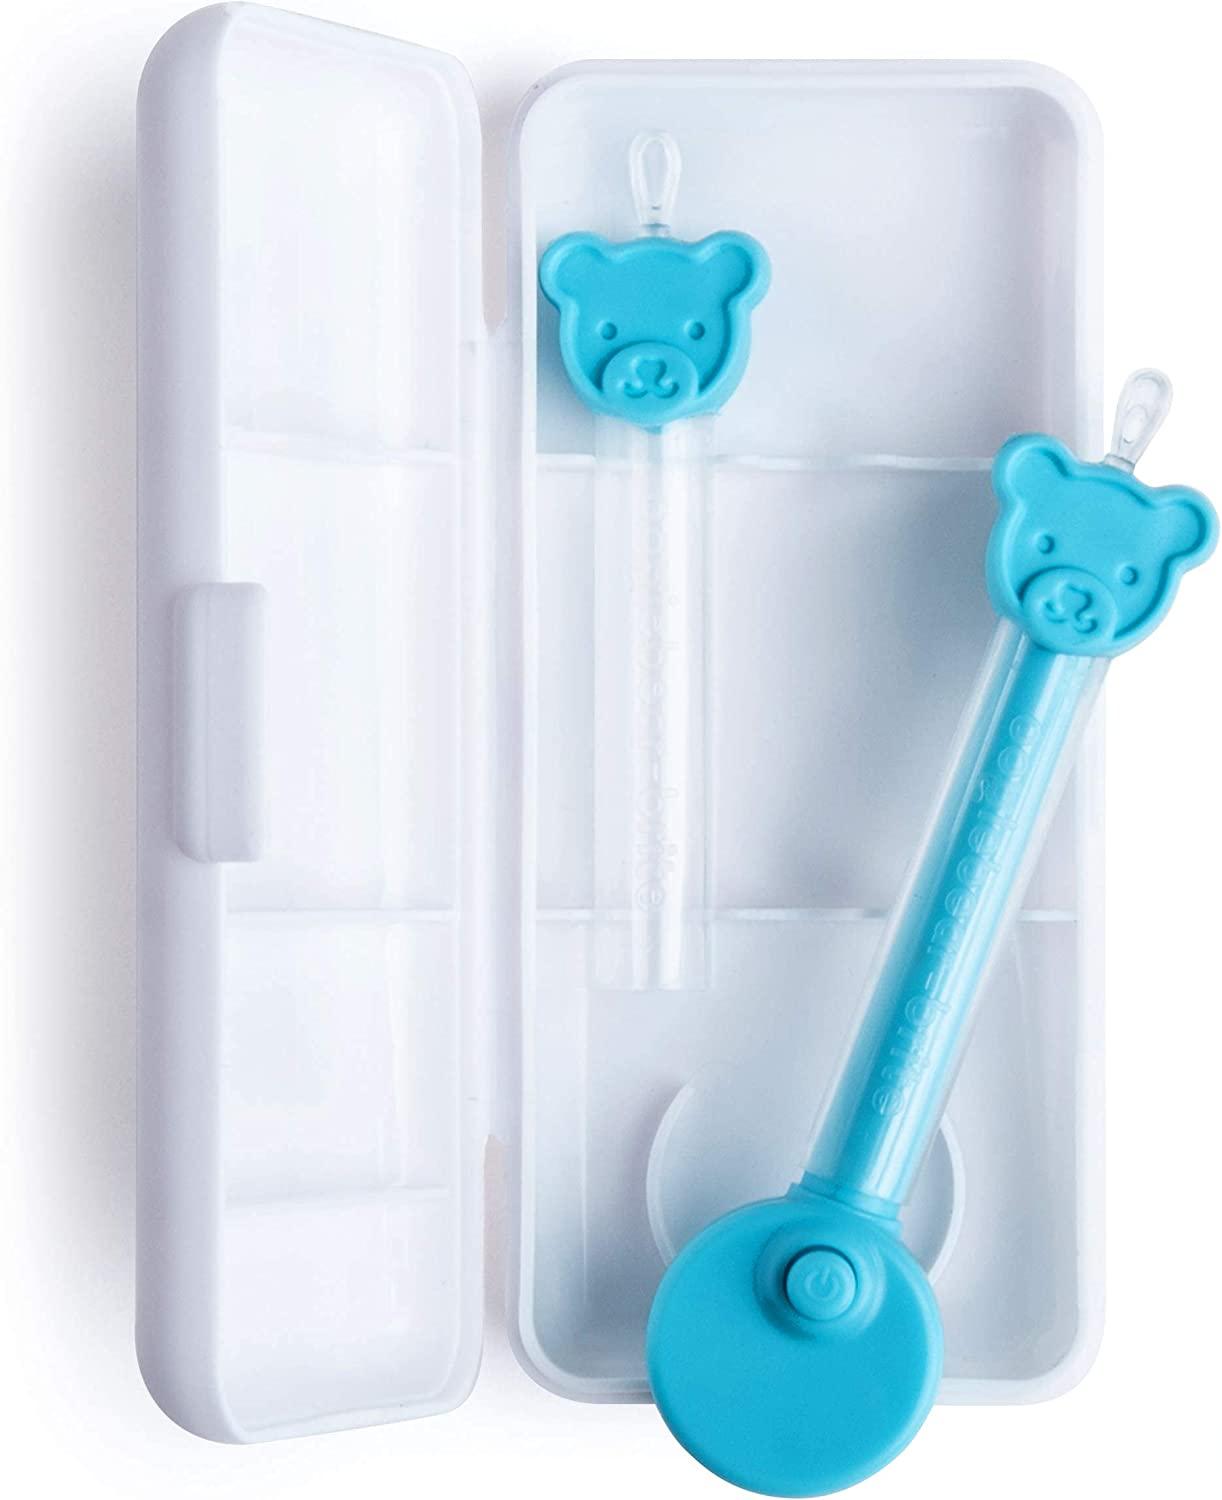 ⚡️Discover Oogiebear Infant Nose & Ear Cleaner at The Nest